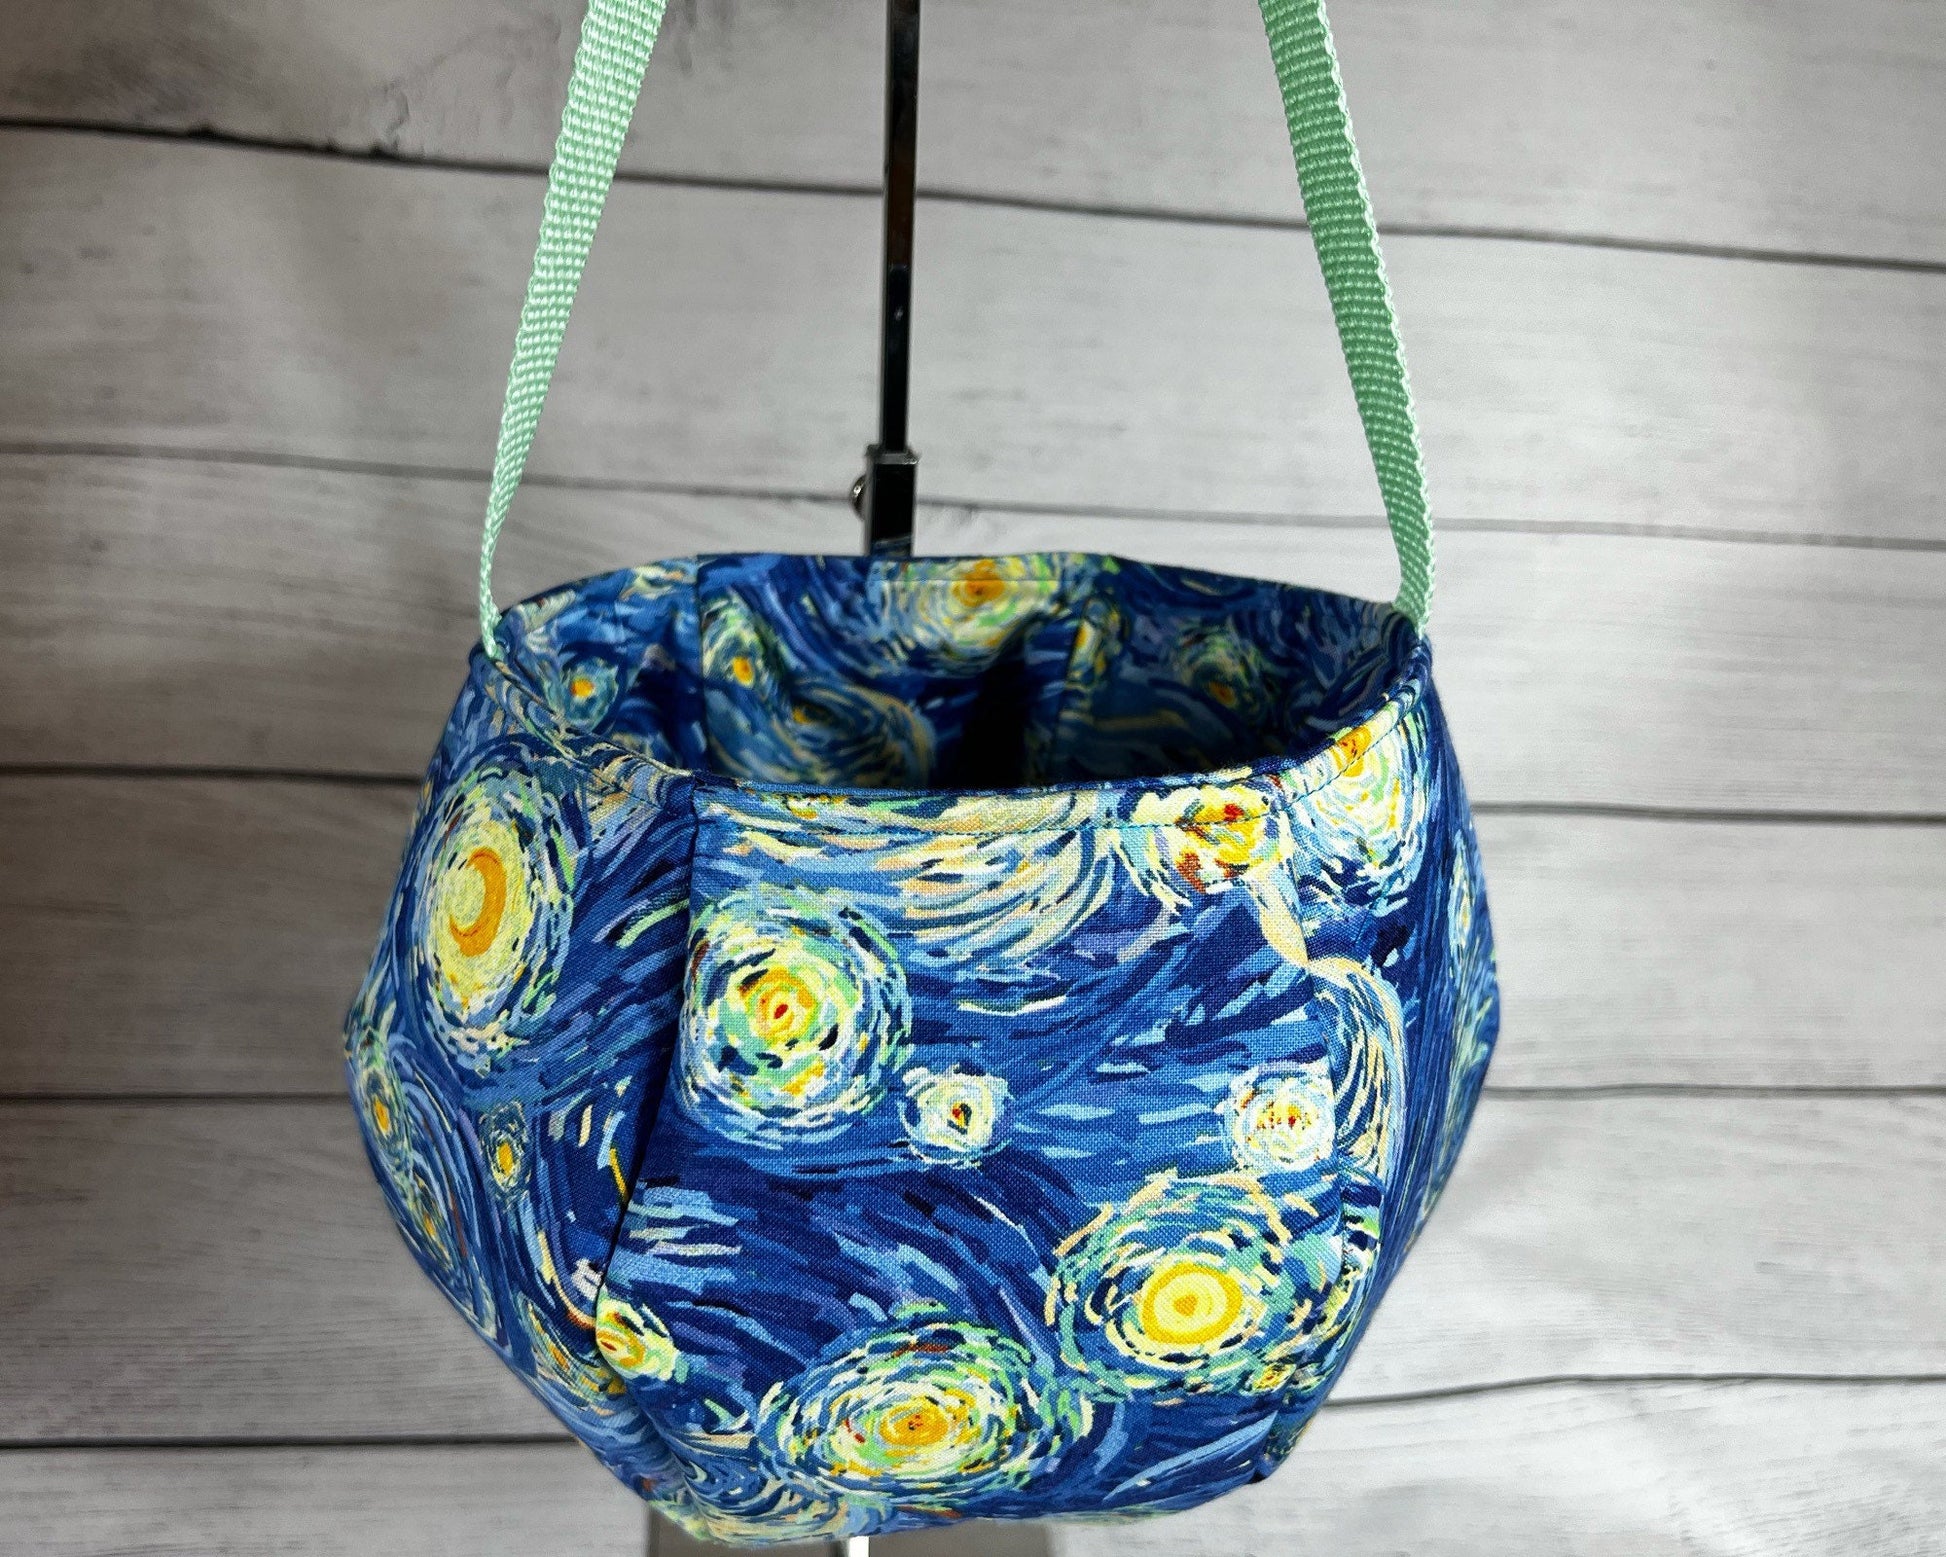 Vincent Van Gogh Starry Night Tote Bag - Tote - Art - Blurry Sky - Night Sky - Blue - Everyday - Holiday - Easter - Halloween - Party - Gift